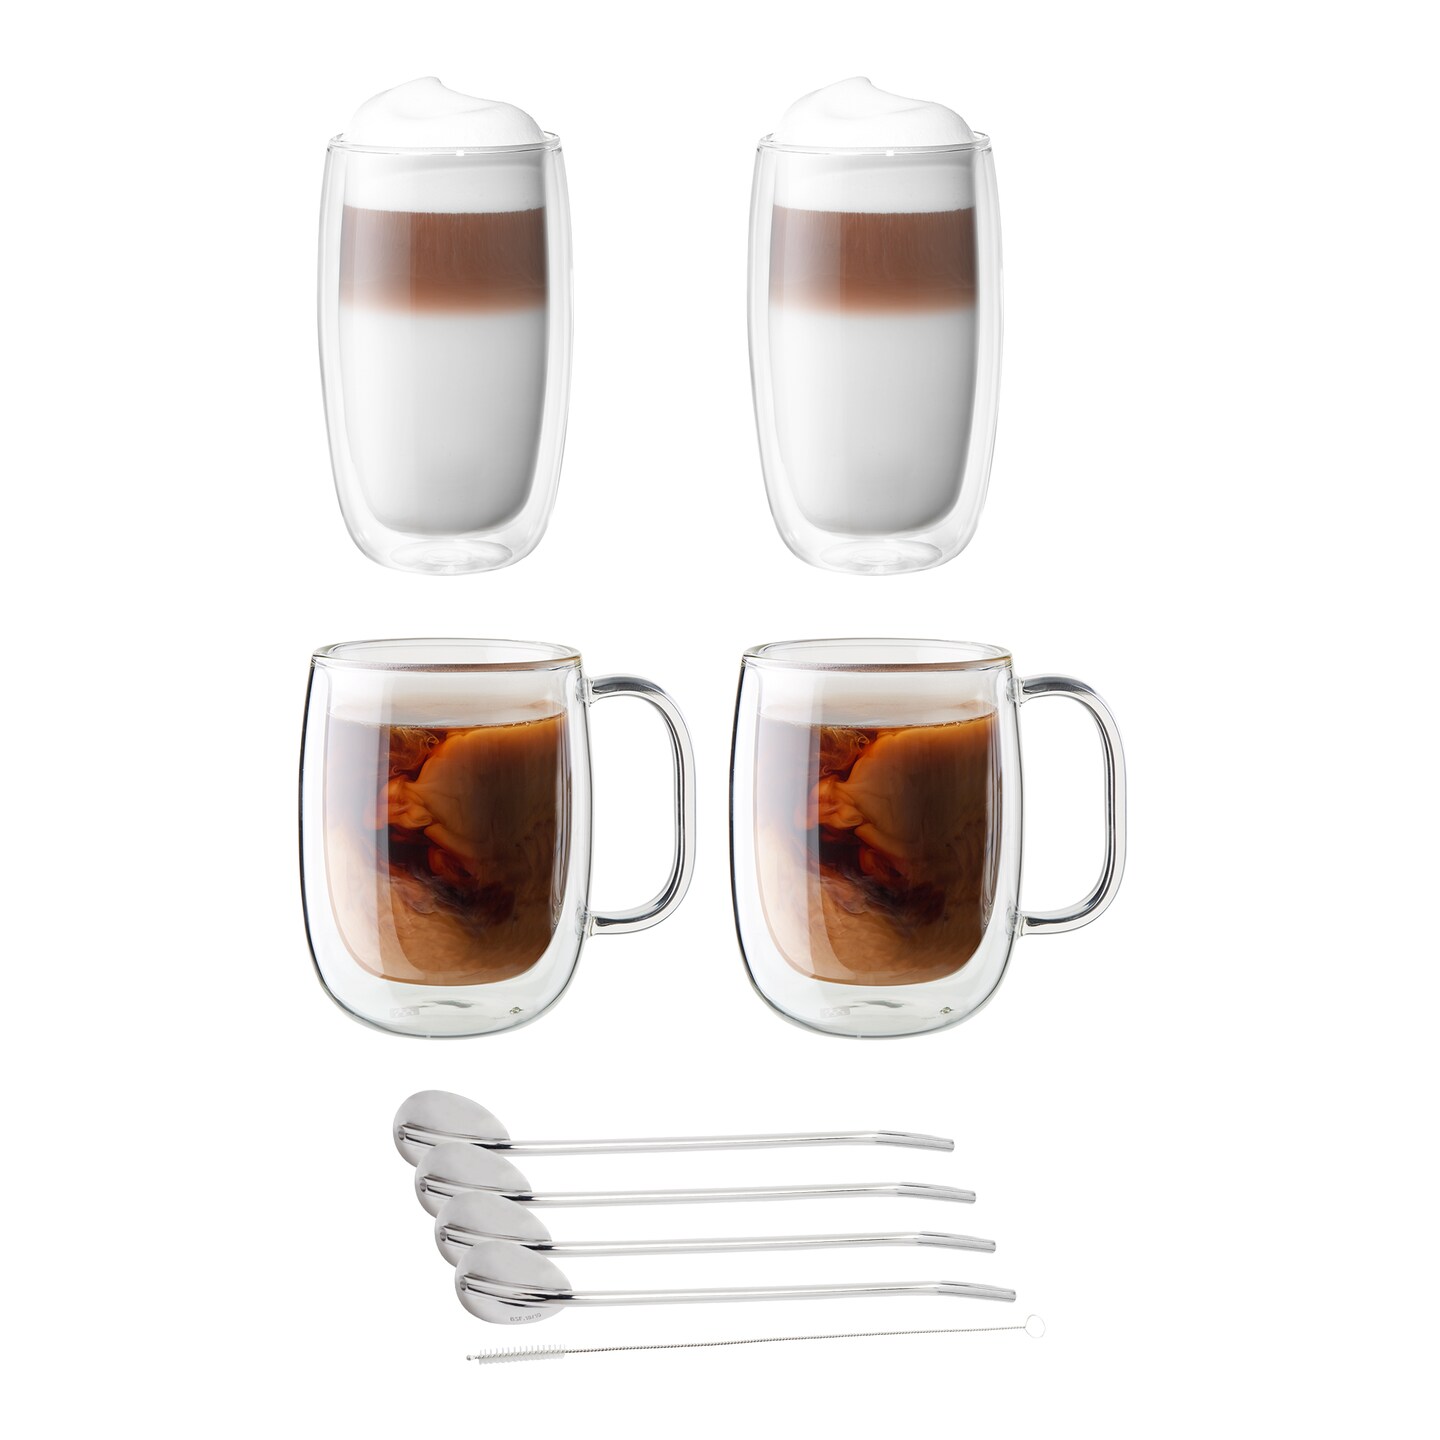 ZWILLING Sorrento Double-Wall Coffee and Beverage 9-pc Glassware Set